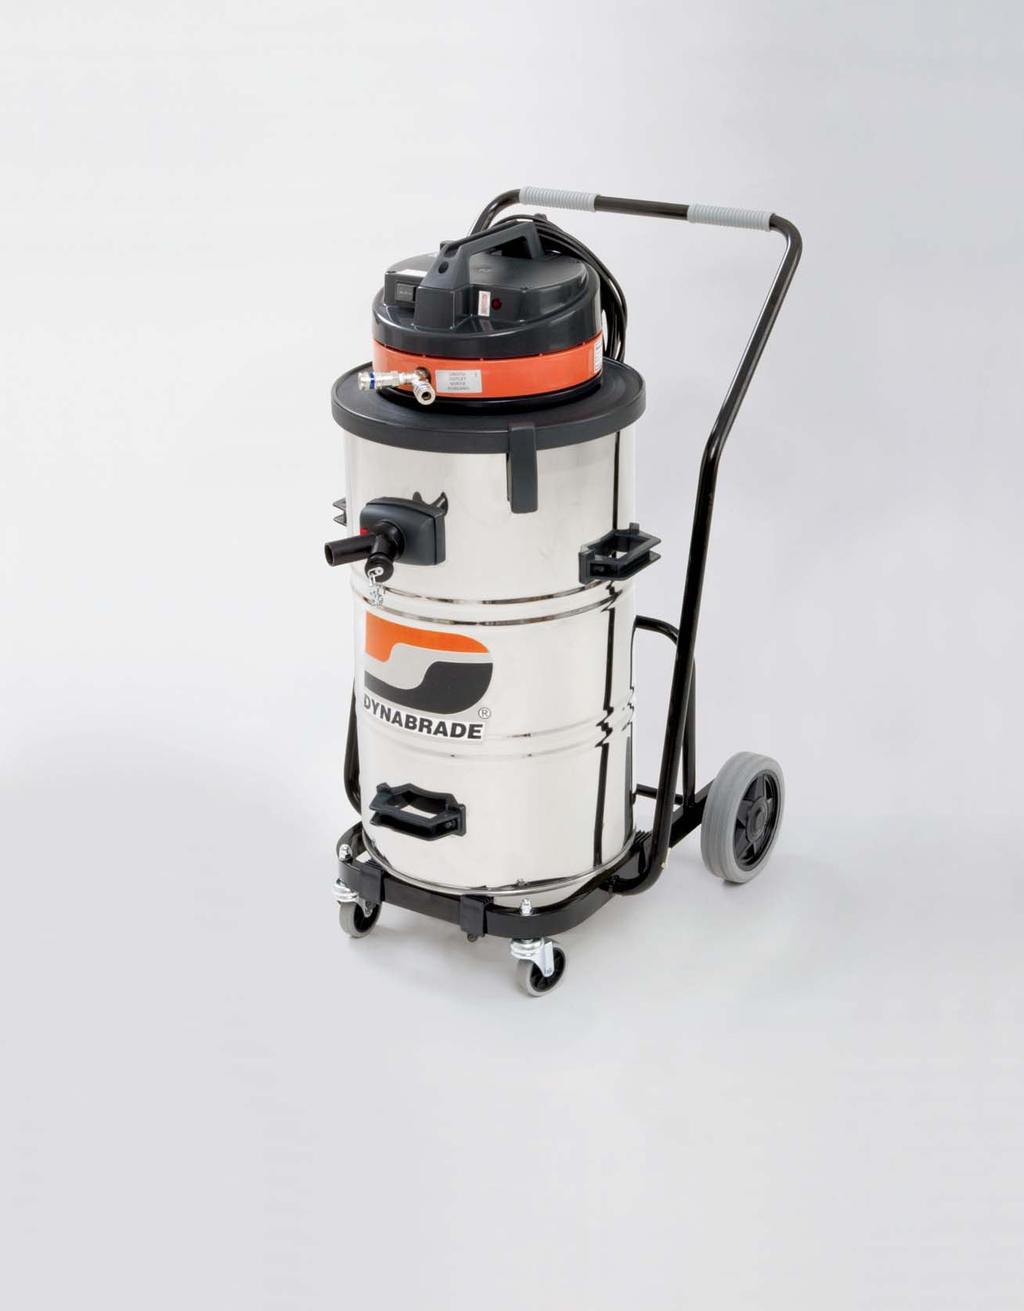 Electric Portable Vacuum Systems Ideal for Use with Dynabrade Vacuum-Ready Air Tools 17 Gallon (64 Liter) Capacity Maximum Vacuum Suction Offers 90" (229 cm/230 mbar) of water static lift.